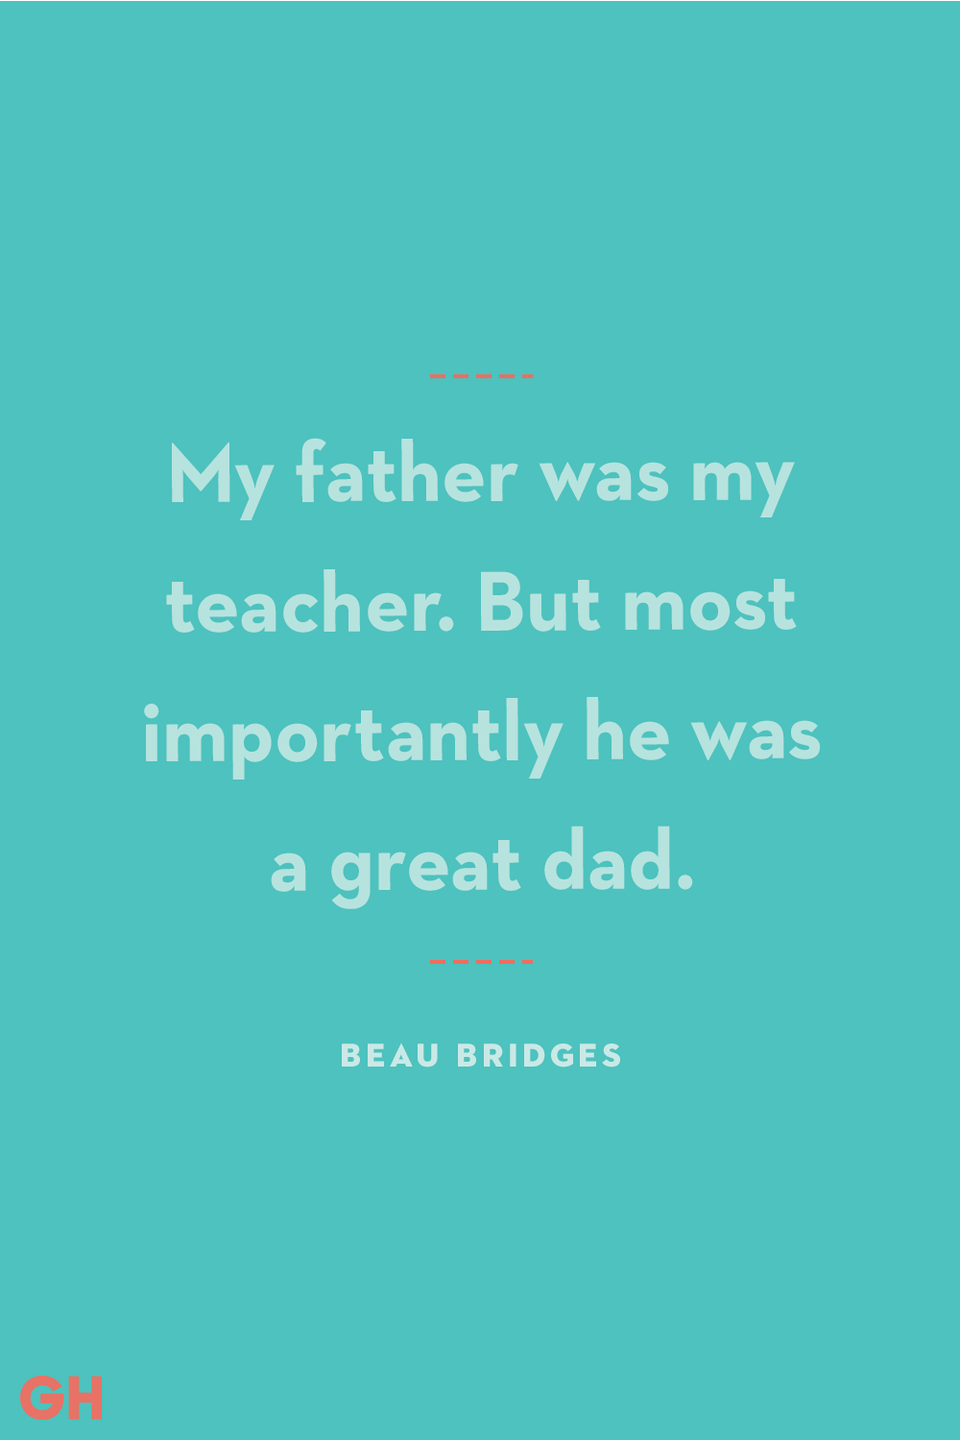 <p>My father was my teacher. But most importantly he was a great dad.</p>